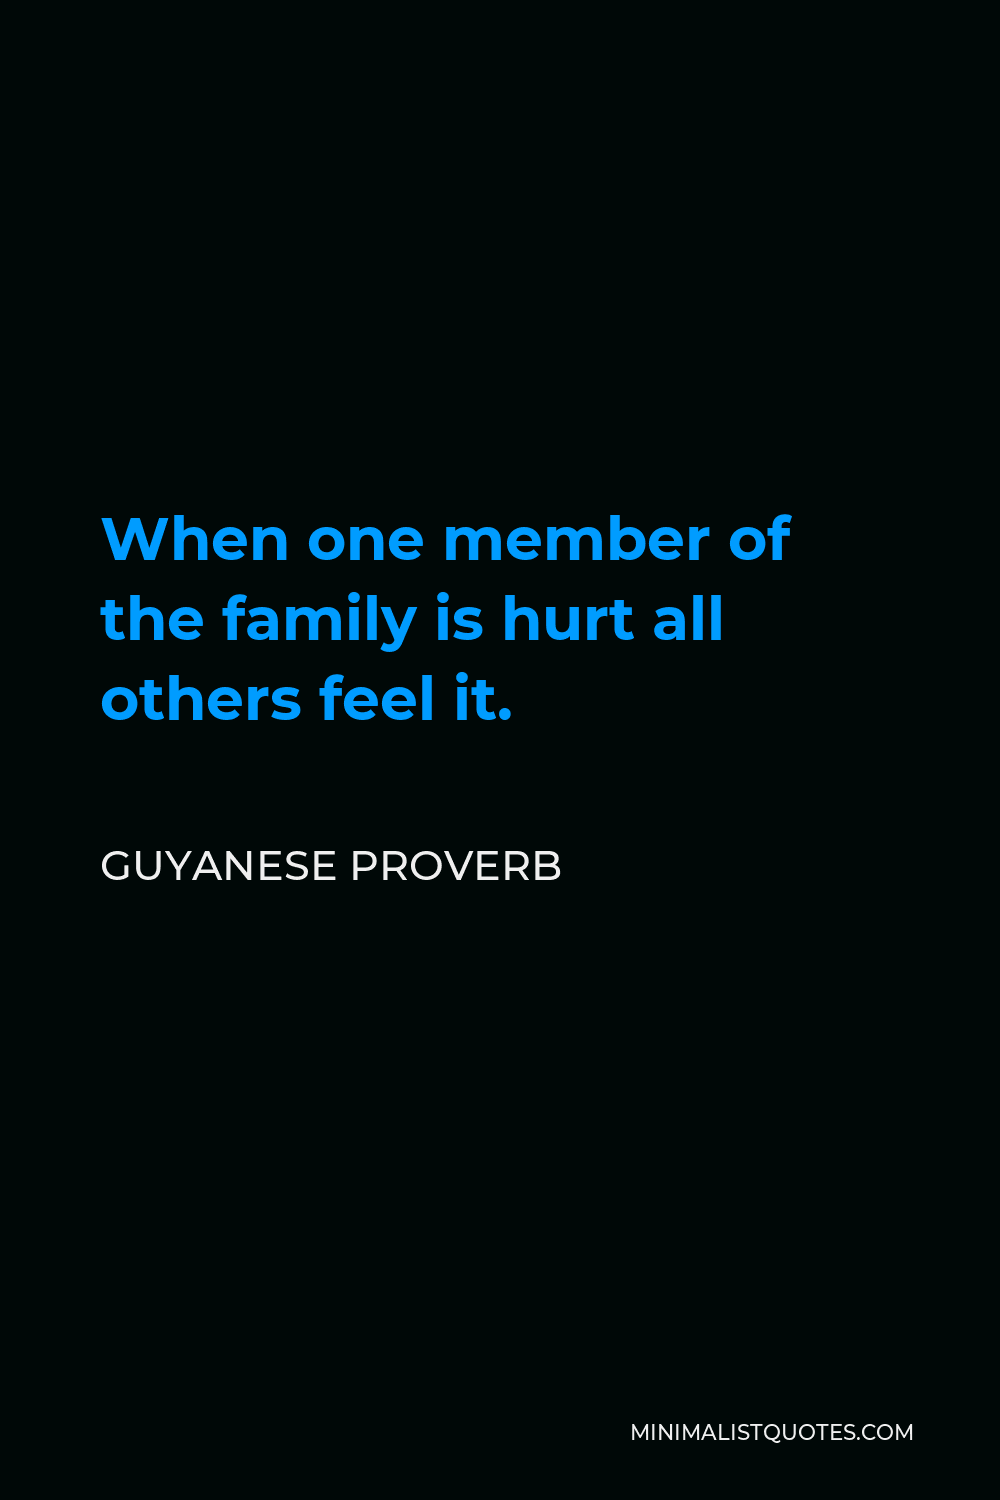 Guyanese Proverb Quote - When one member of the family is hurt all others feel it.